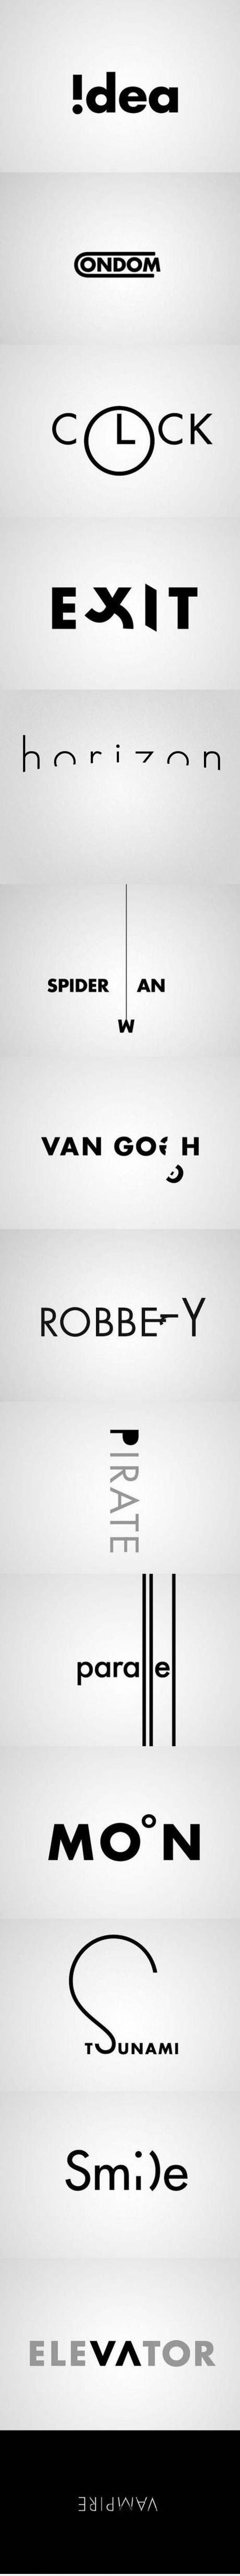 typography fun!. . Heel ANDOM EXIT SPIDER AN VAN Got H ROBBI‘ Y para e MOON T INAMI Smae ELEVATOR. These are quite interesting actually. I'm studying to be a graphic designer so I learn something from these. Please post more!